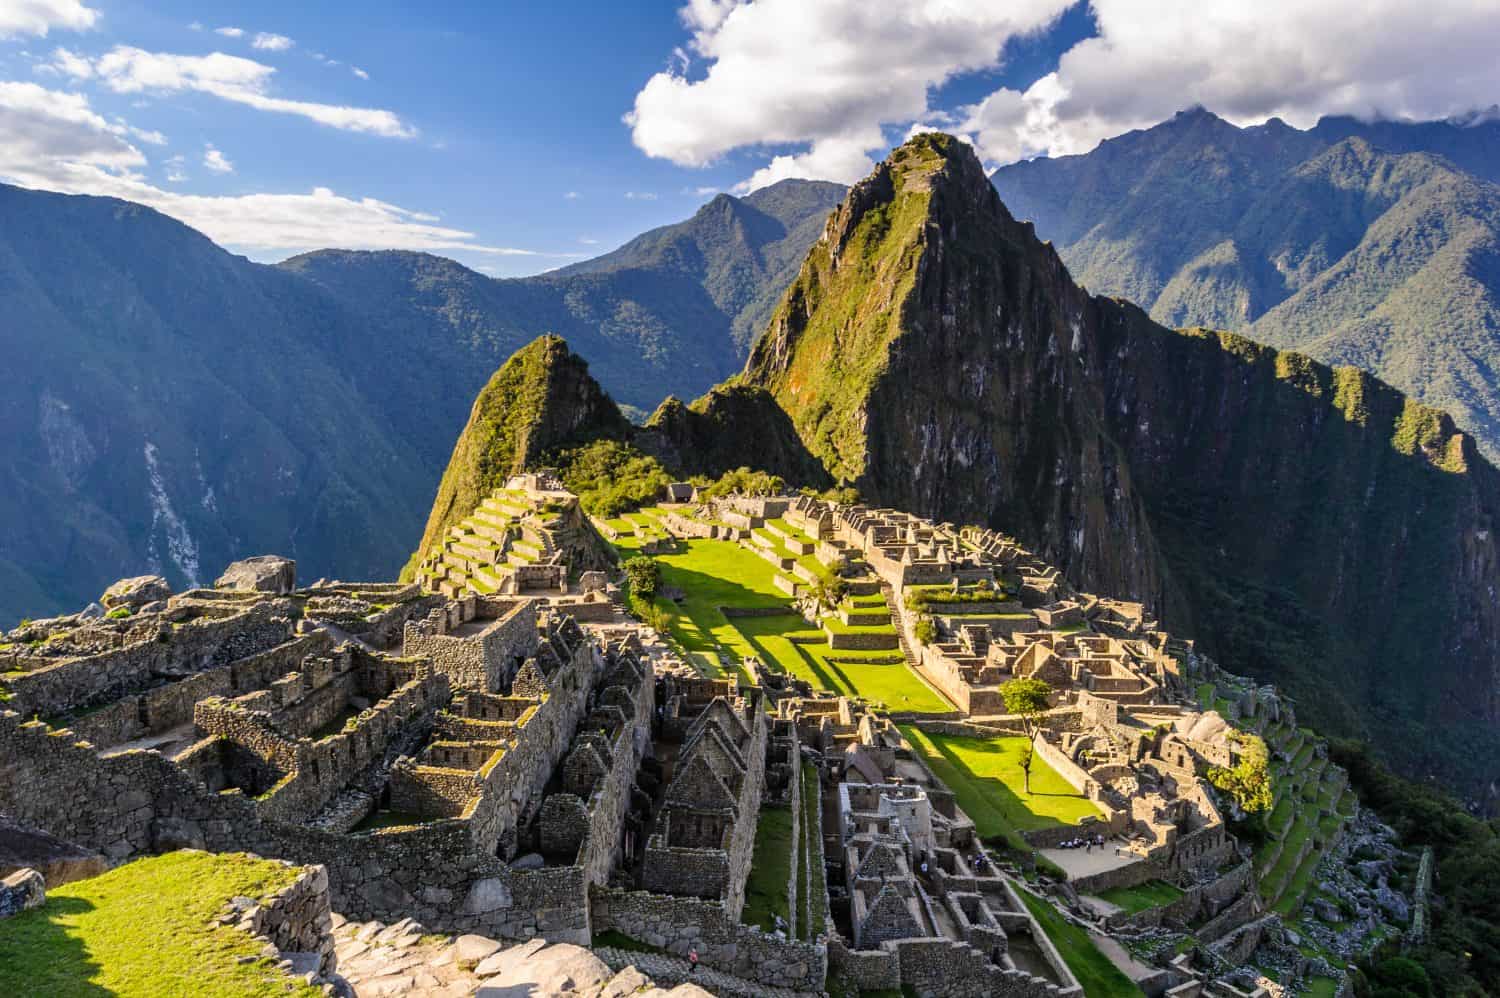 <ul> <li><strong>Location:</strong> Peru</li> <li><strong>Known For:</strong> Being the "lost city of the Incas"</li> </ul> <p>Machu Picchu is a popular place for tourists to visit in the South American country of Peru. However, the Incan citadel is in danger of disappearing. With the fragile state of the citadel, the amount of tourists who can visit daily has decreased. Yet, the visits are still taking their toll, leading to erosion at a speedy rate. Along with the many tourists, Machu Picchu is threatened by erosion and landslides. All of these factors may contribute to its destruction.</p>